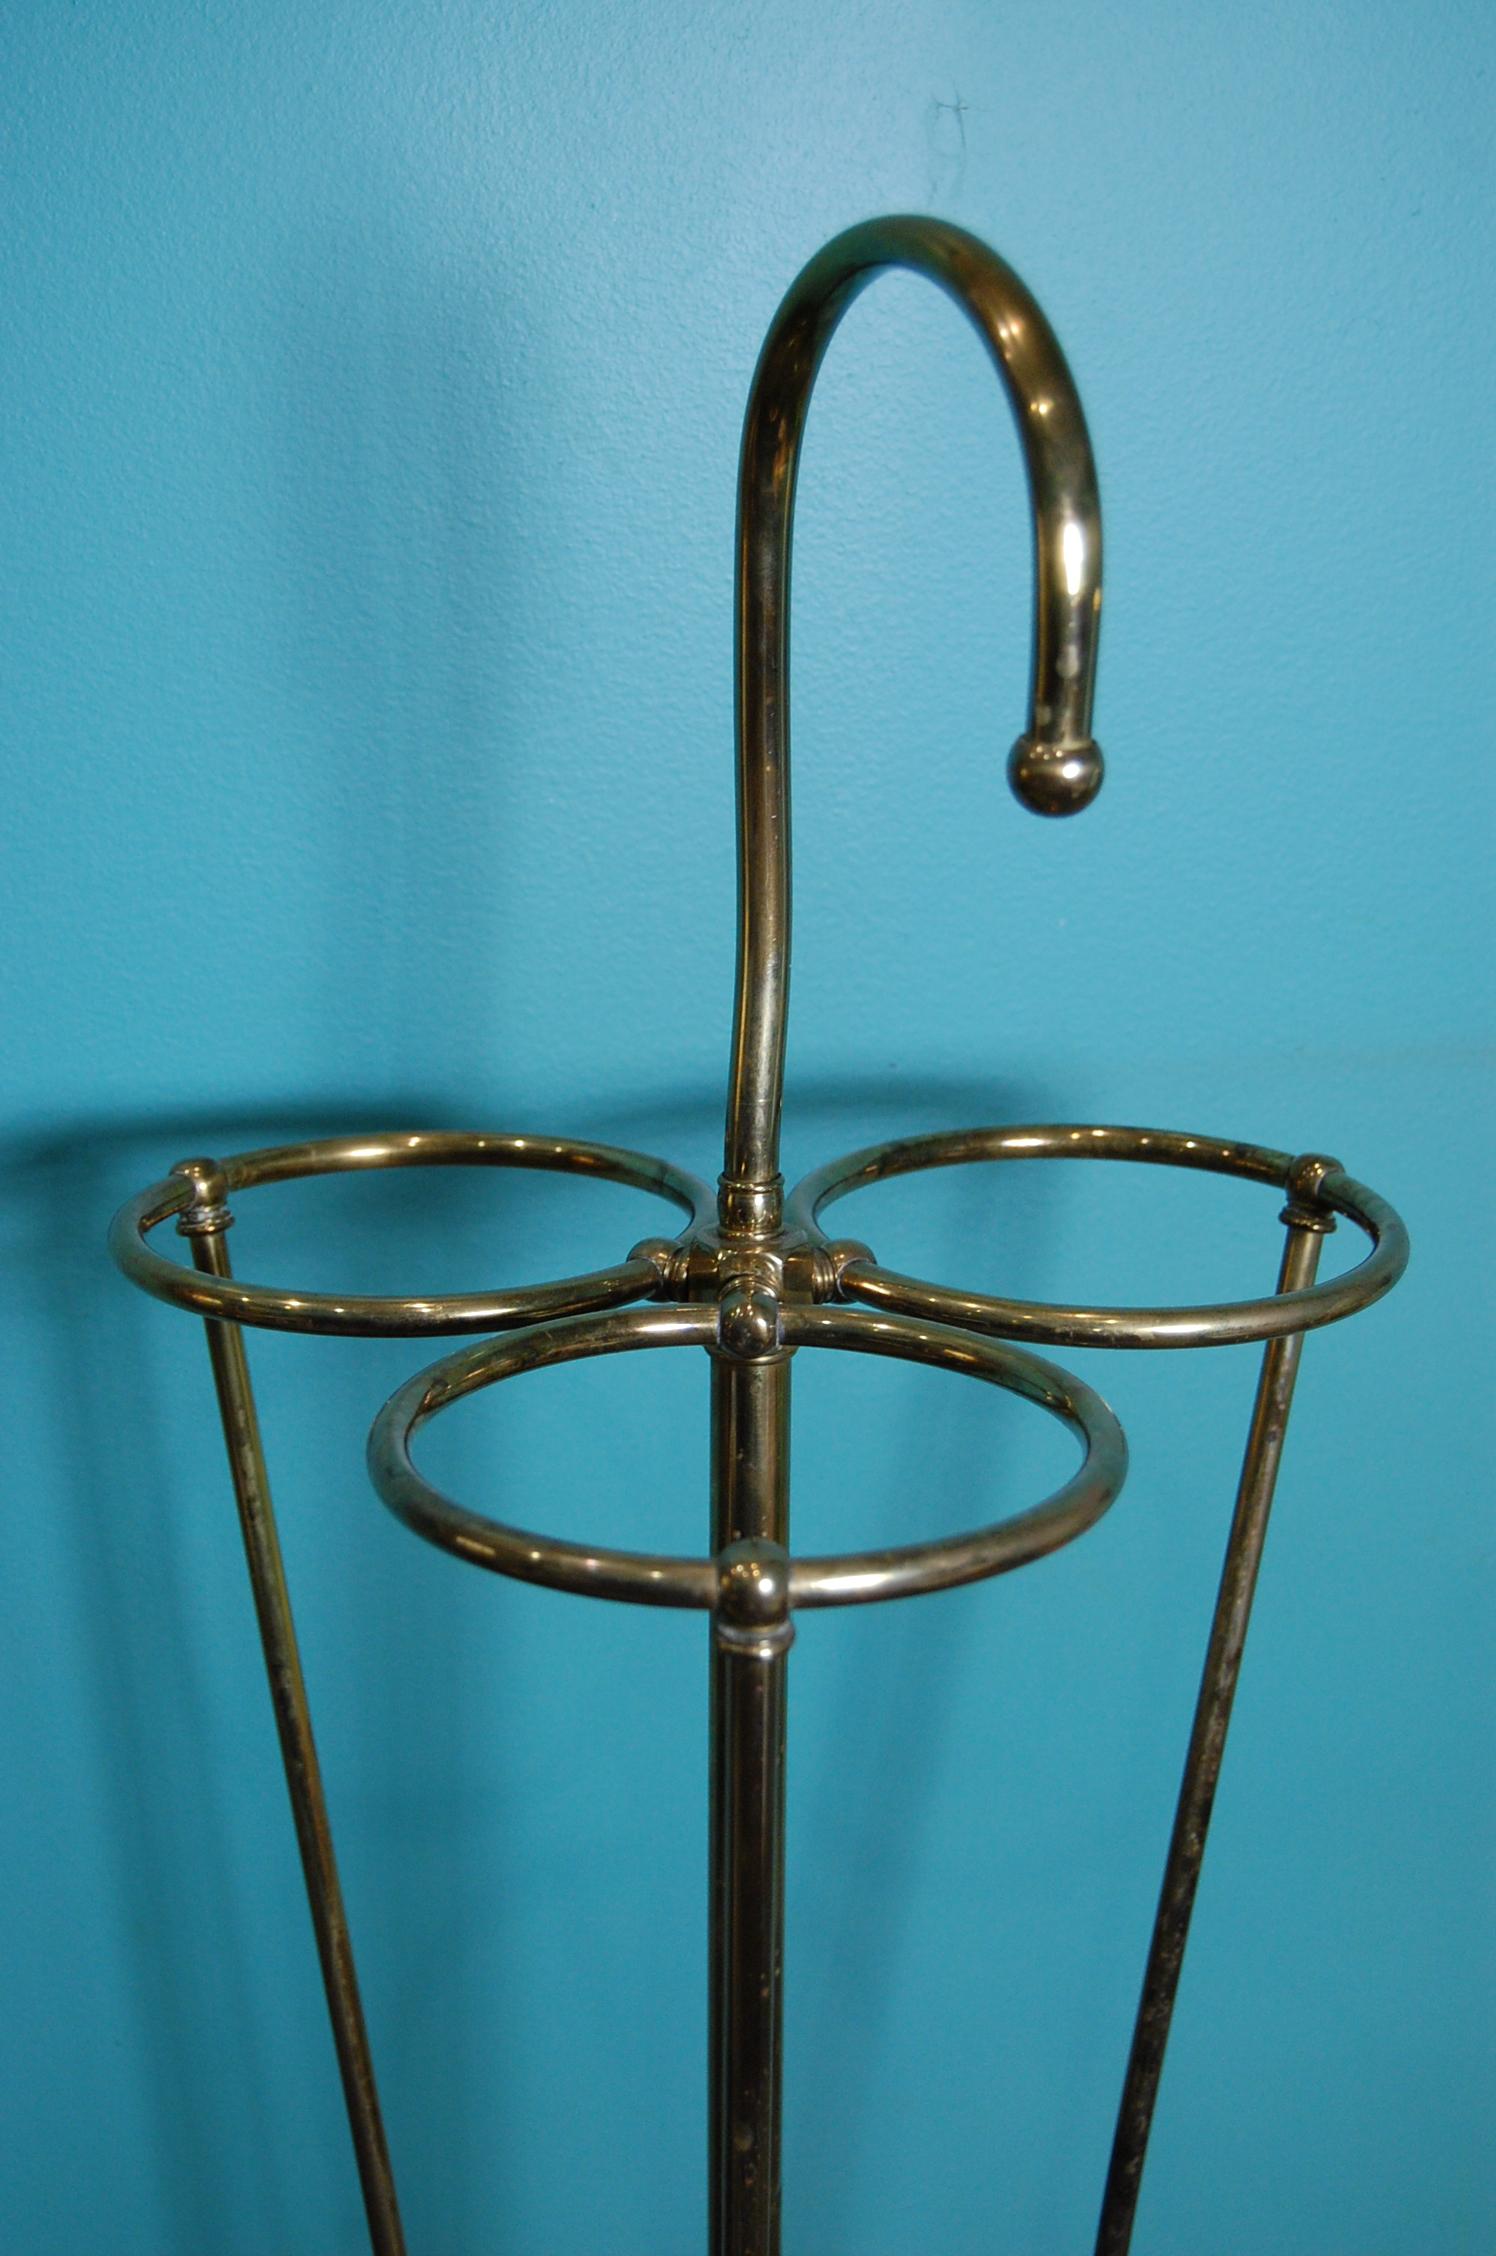 Mid-20th Century Brass Umbrella Stand by Herco Art Manufacturing Company In Good Condition For Sale In Pittsburgh, PA